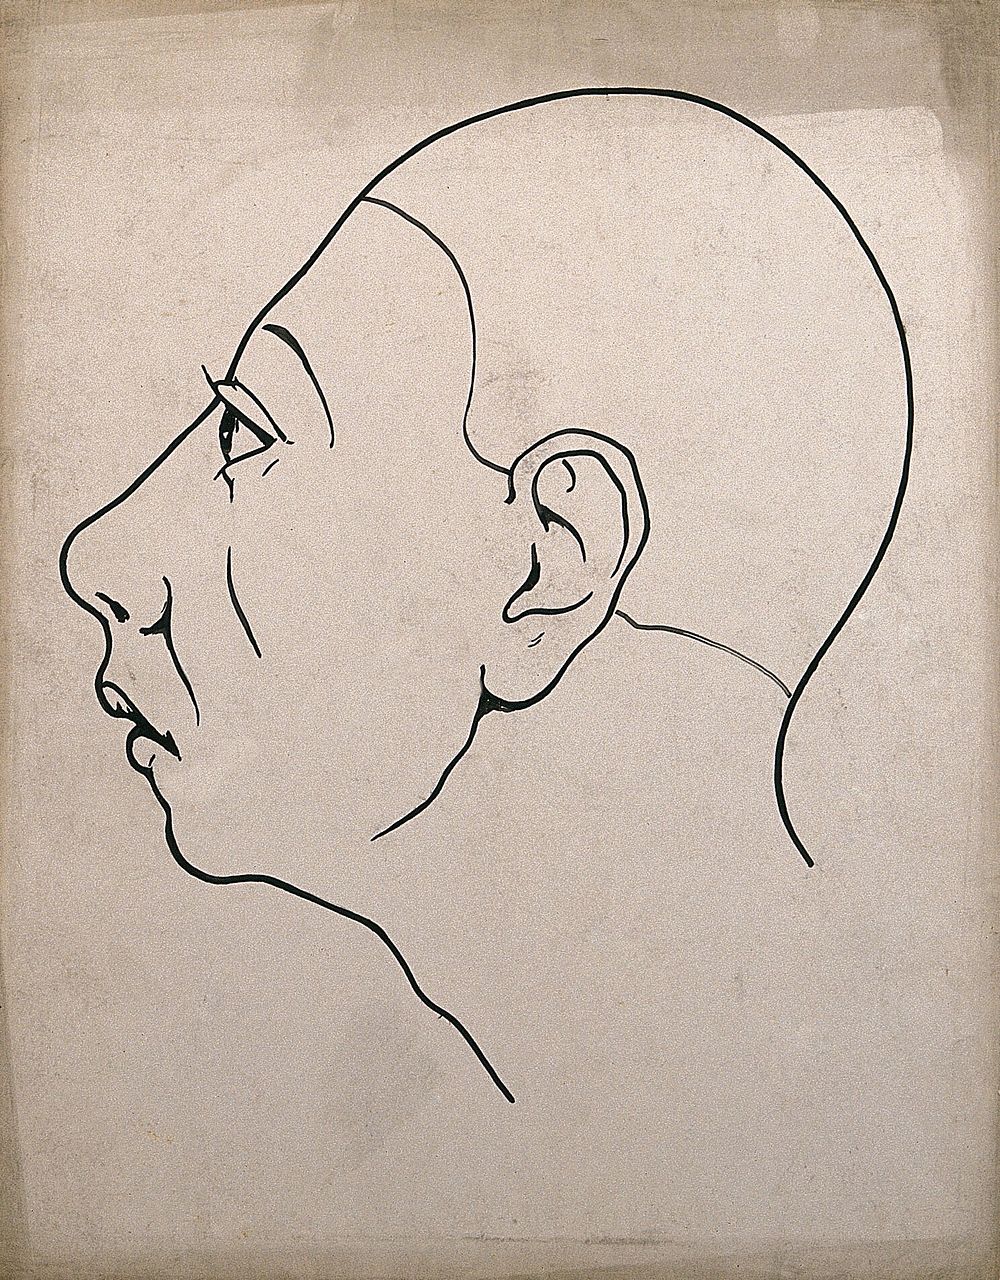 Left profile of a head showing depressed frontal lobes. Drawing, c. 1900.